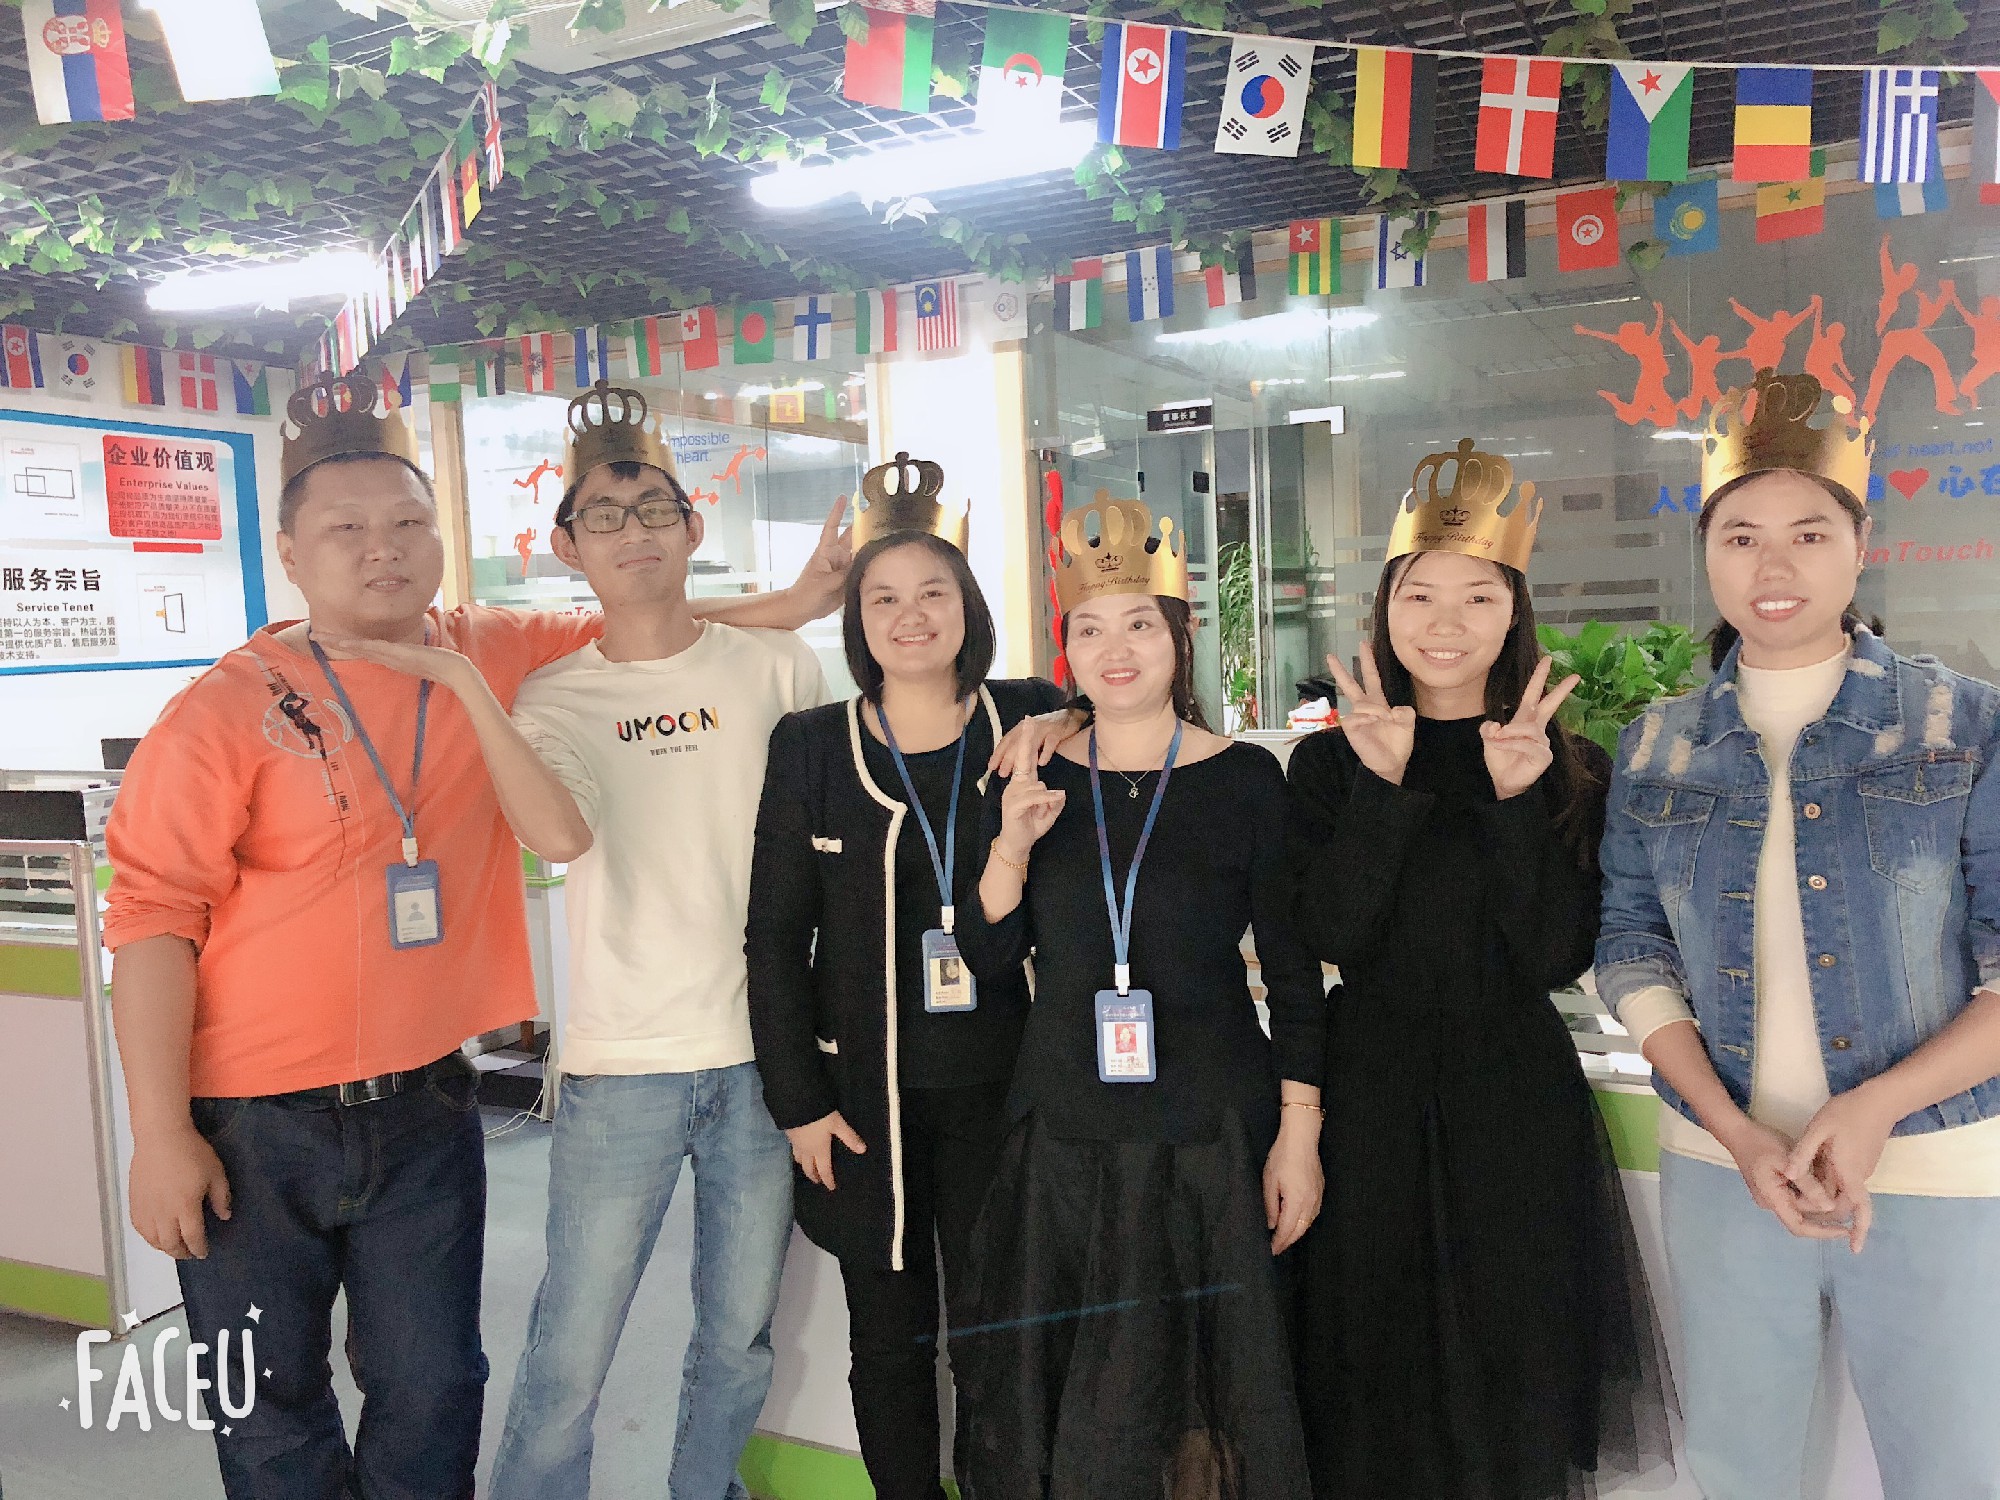 On December 26, 2019, the company held a birthday party for employees